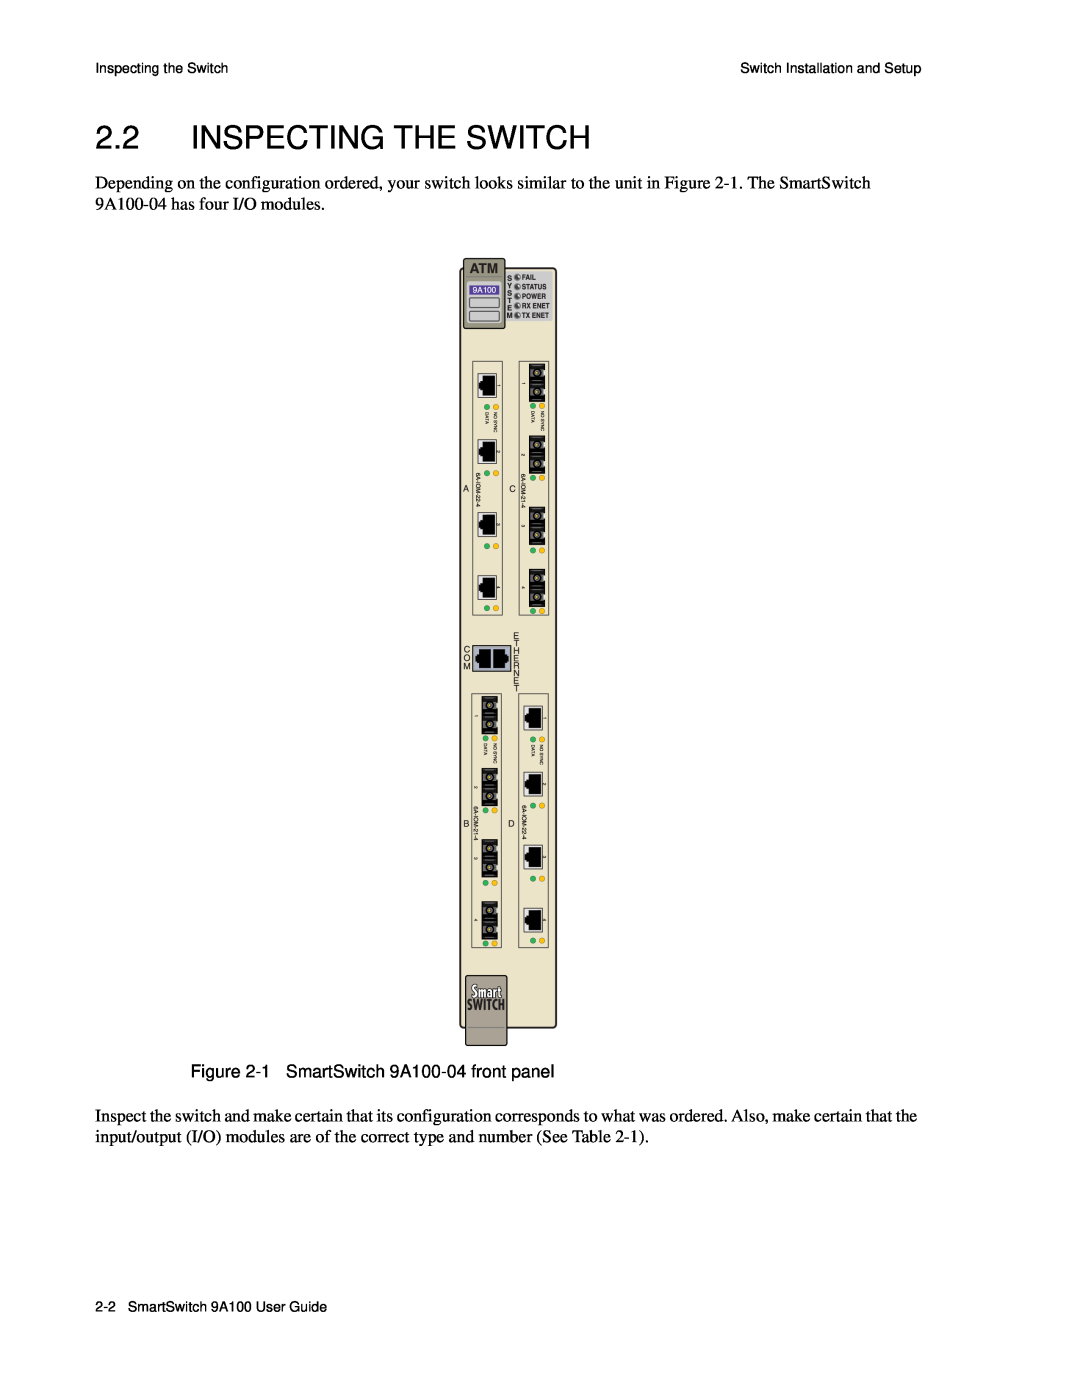 Cabletron Systems manual Inspecting The Switch, 1 SmartSwitch 9A100-04 front panel 